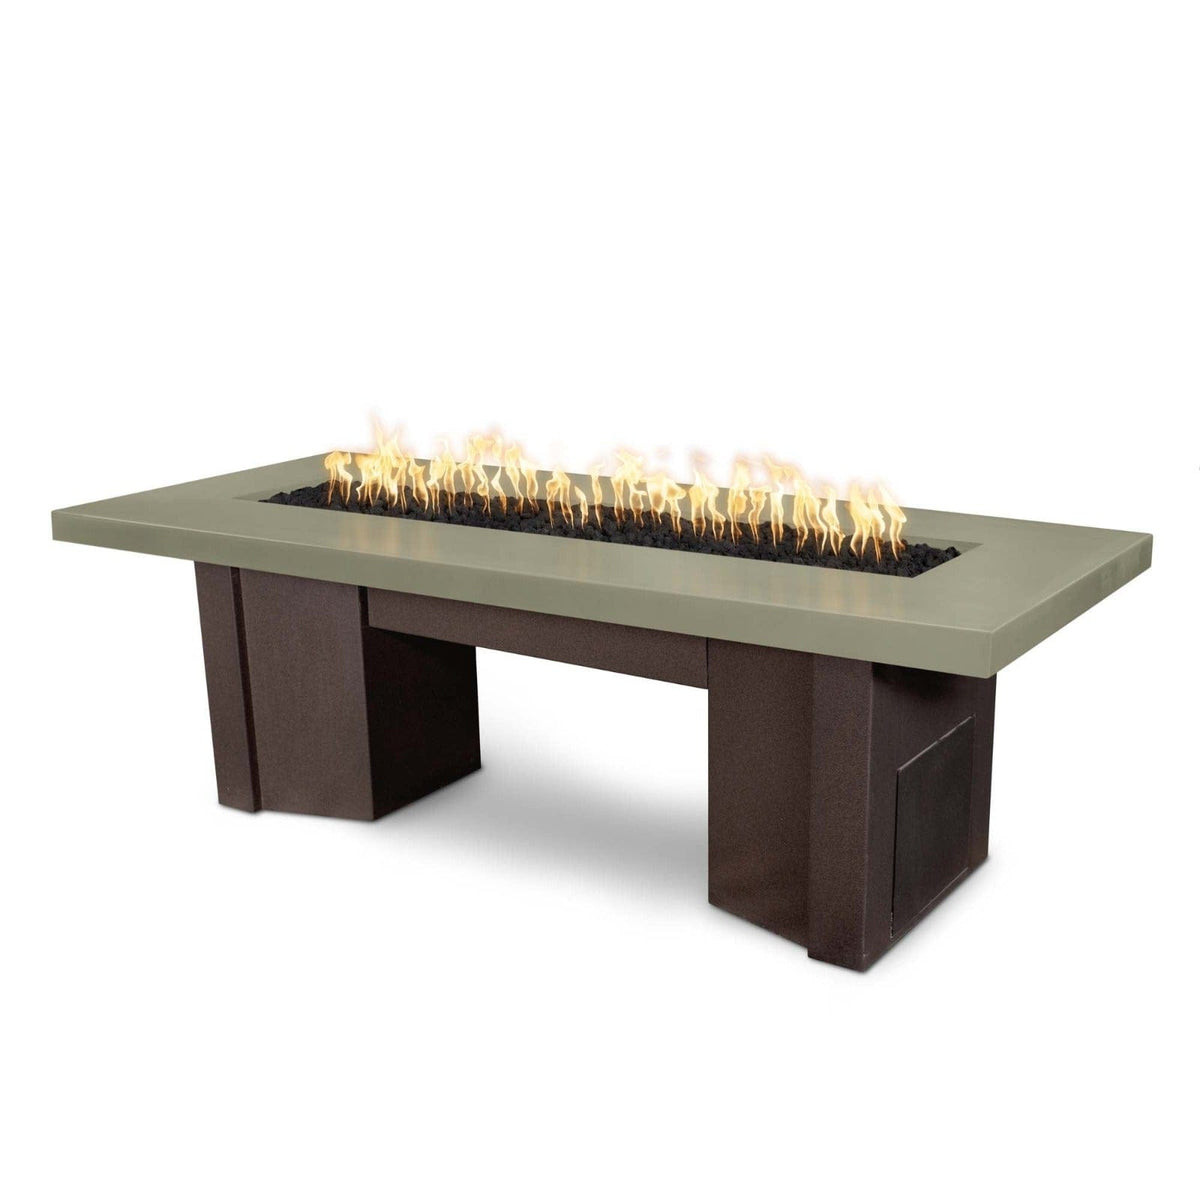 The Outdoor Plus Fire Features Ash (-ASH) / Java Powder Coated Steel (-JAV) The Outdoor Plus 78&quot; Alameda Fire Table Smooth Concrete in Natural Gas - Flame Sense System with Push Button Spark Igniter / OPT-ALMGFRC78FSEN-NG